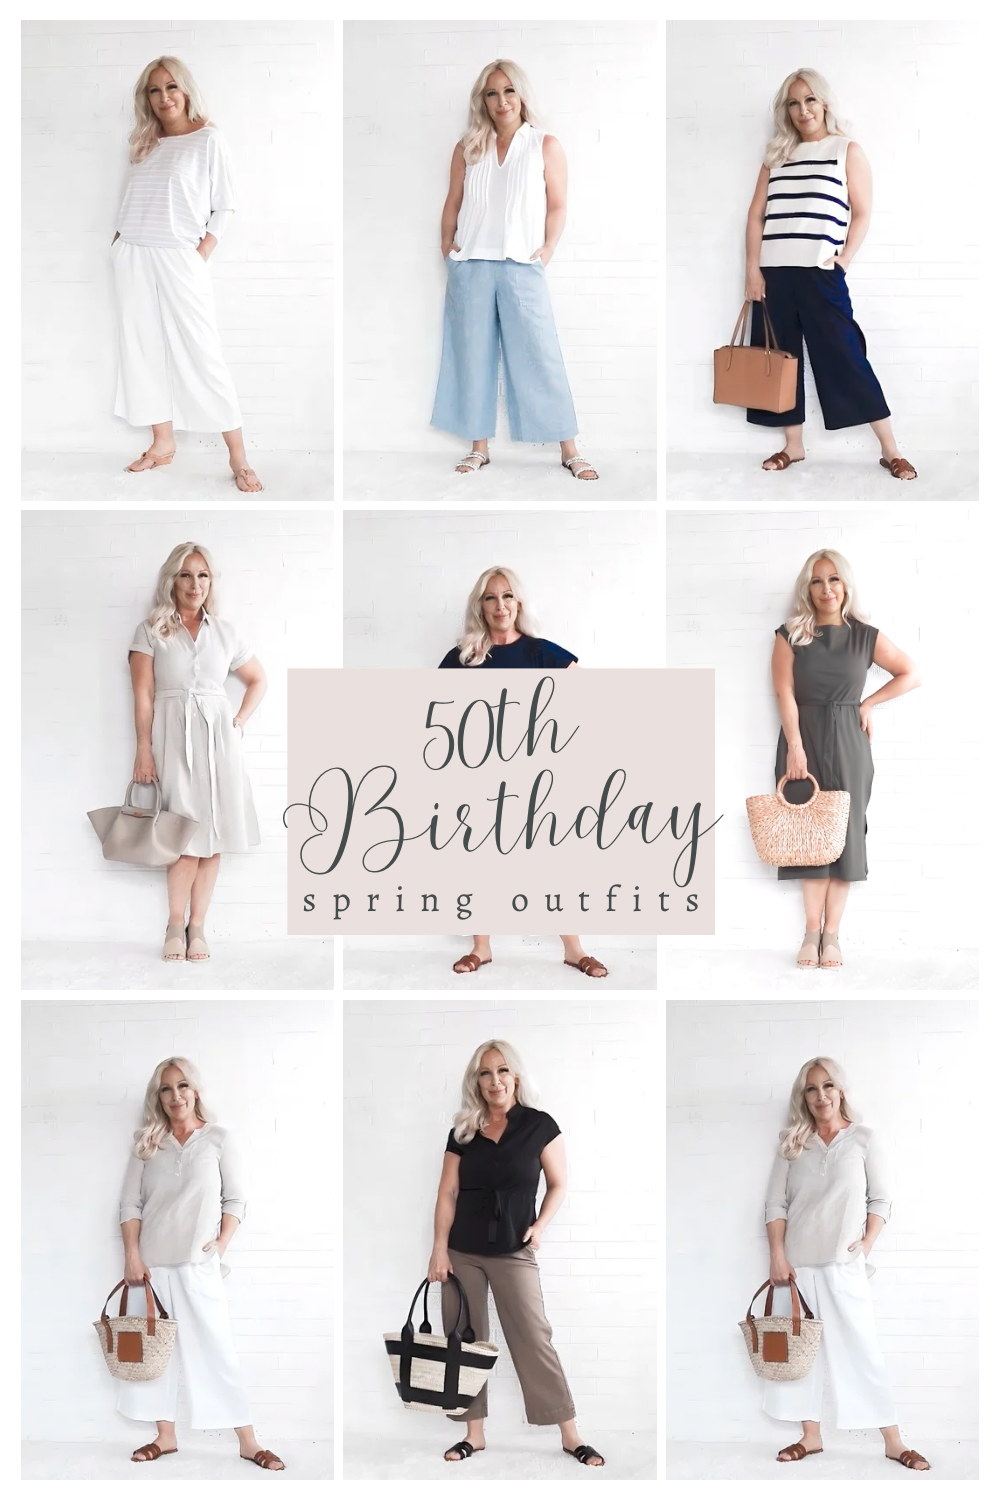 50th Birthday Outfits for Women Over 40 * Women Over 50 * Women Over 60